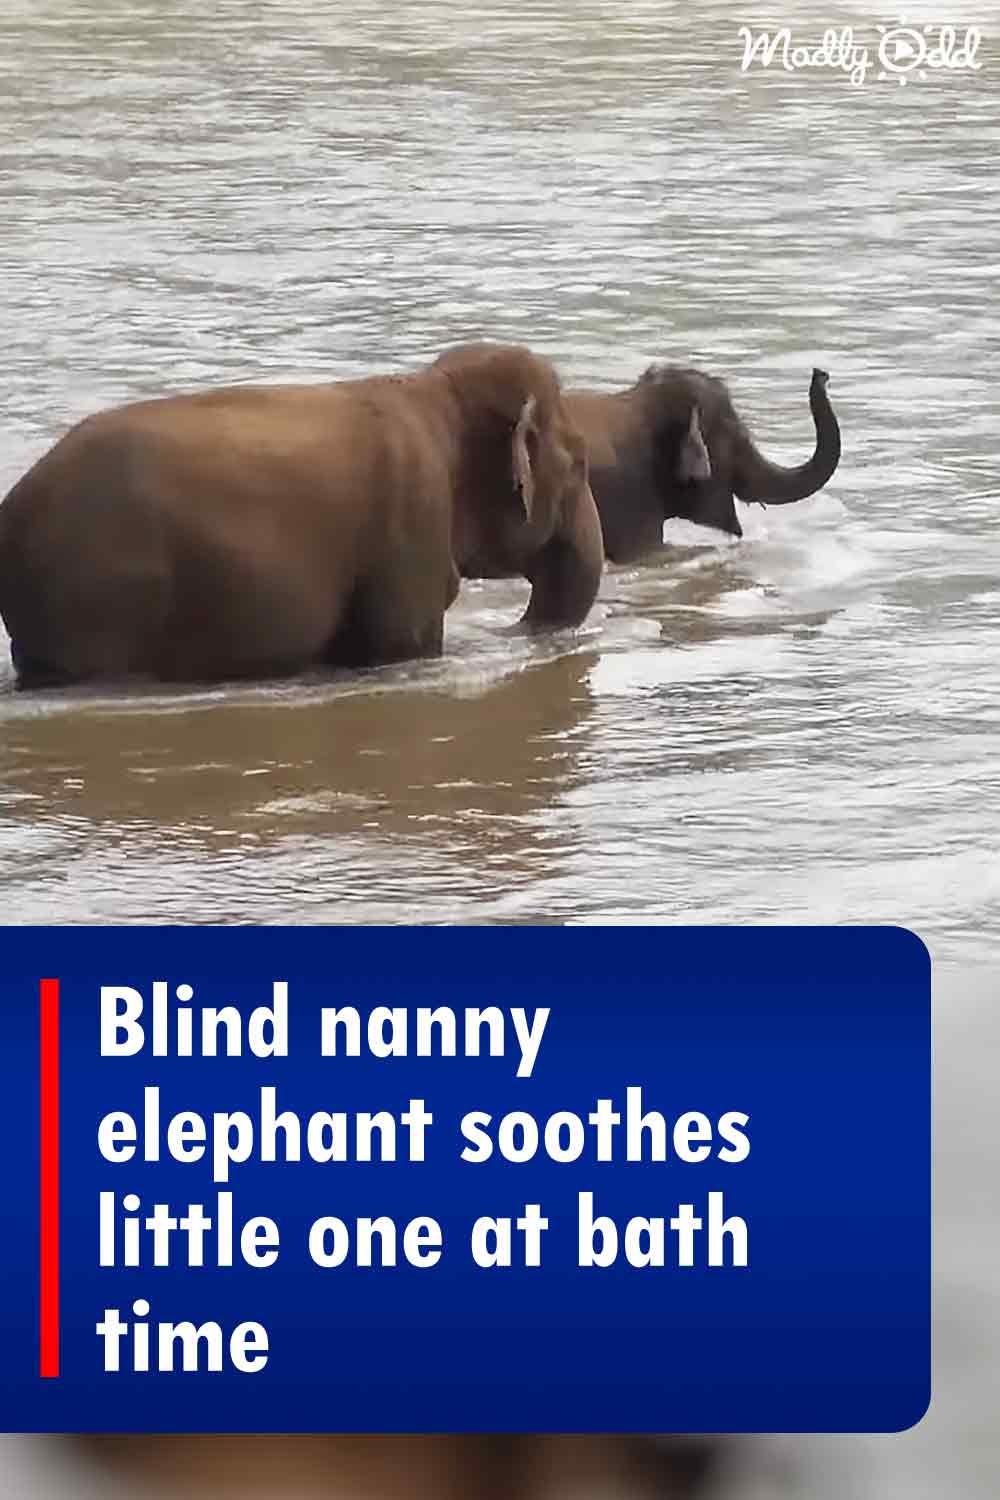 Blind nanny elephant soothes little one at bath time